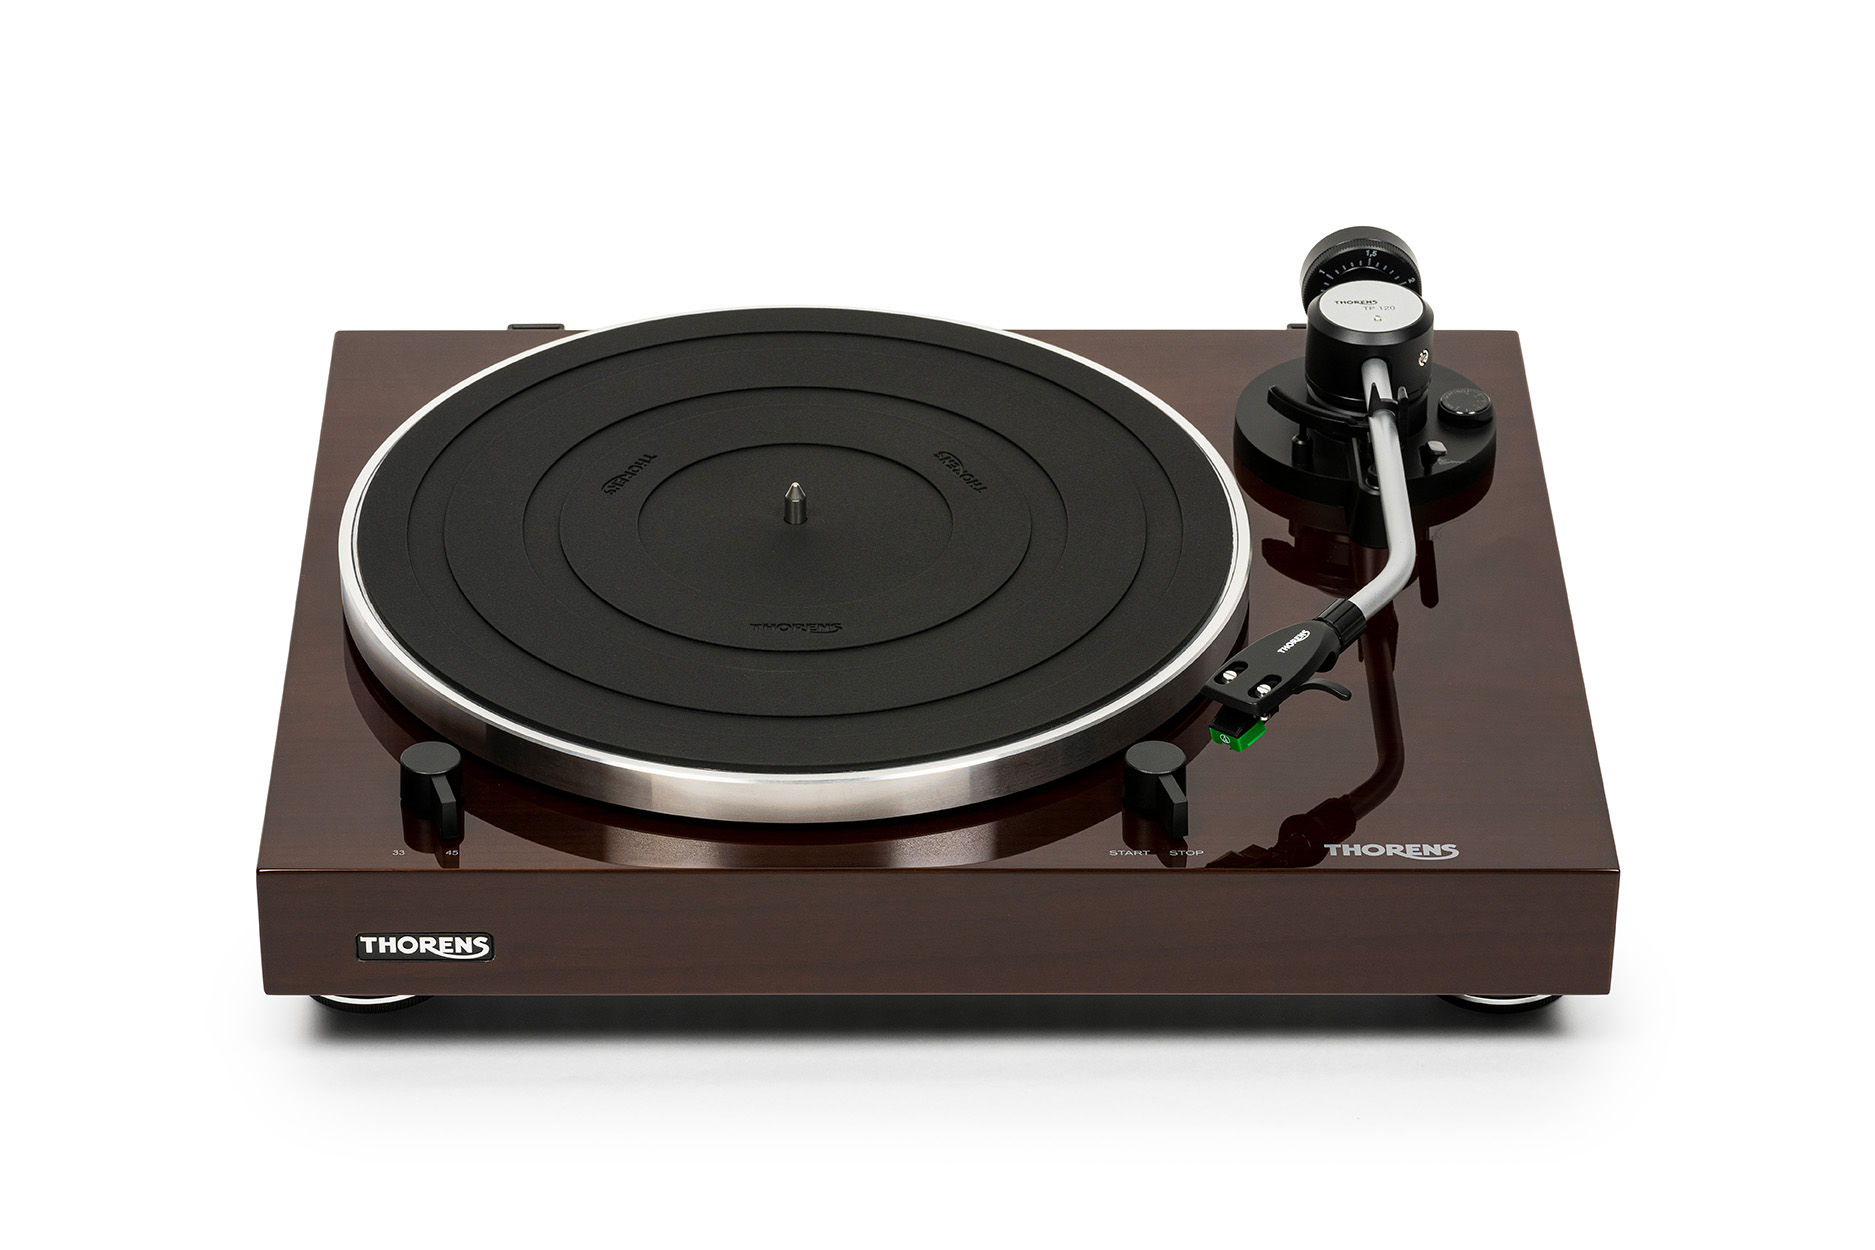 Thorens TD 204 on sale - quantities limited!